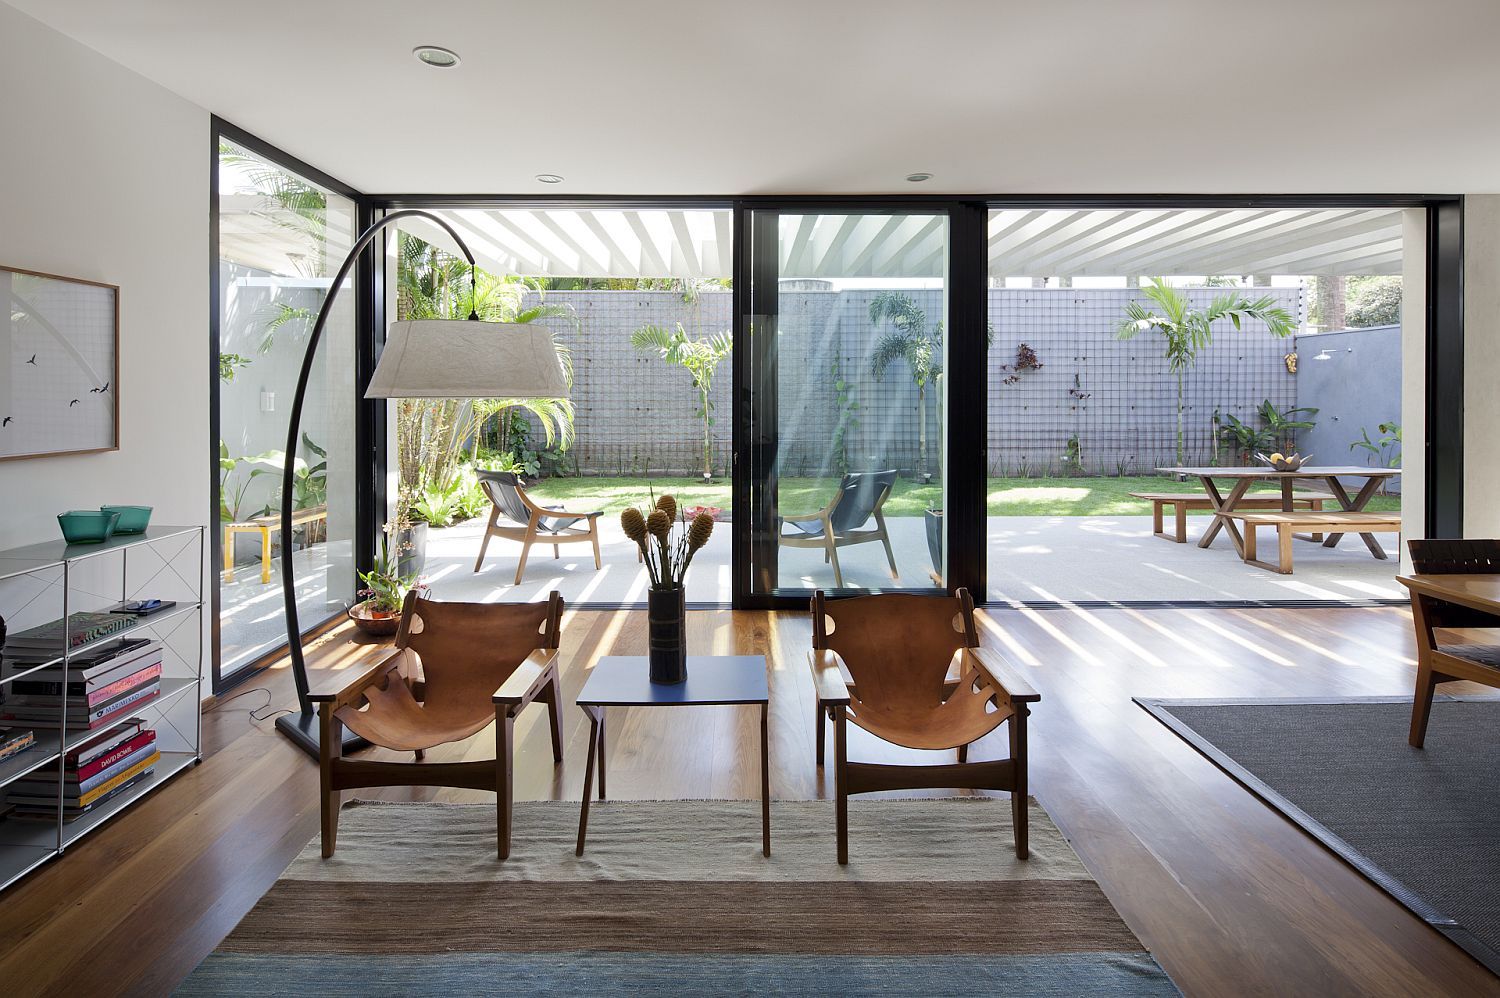 Dark-framed-glass-doors-connect-the-livig-area-with-the-outdoor-dining-and-backyard